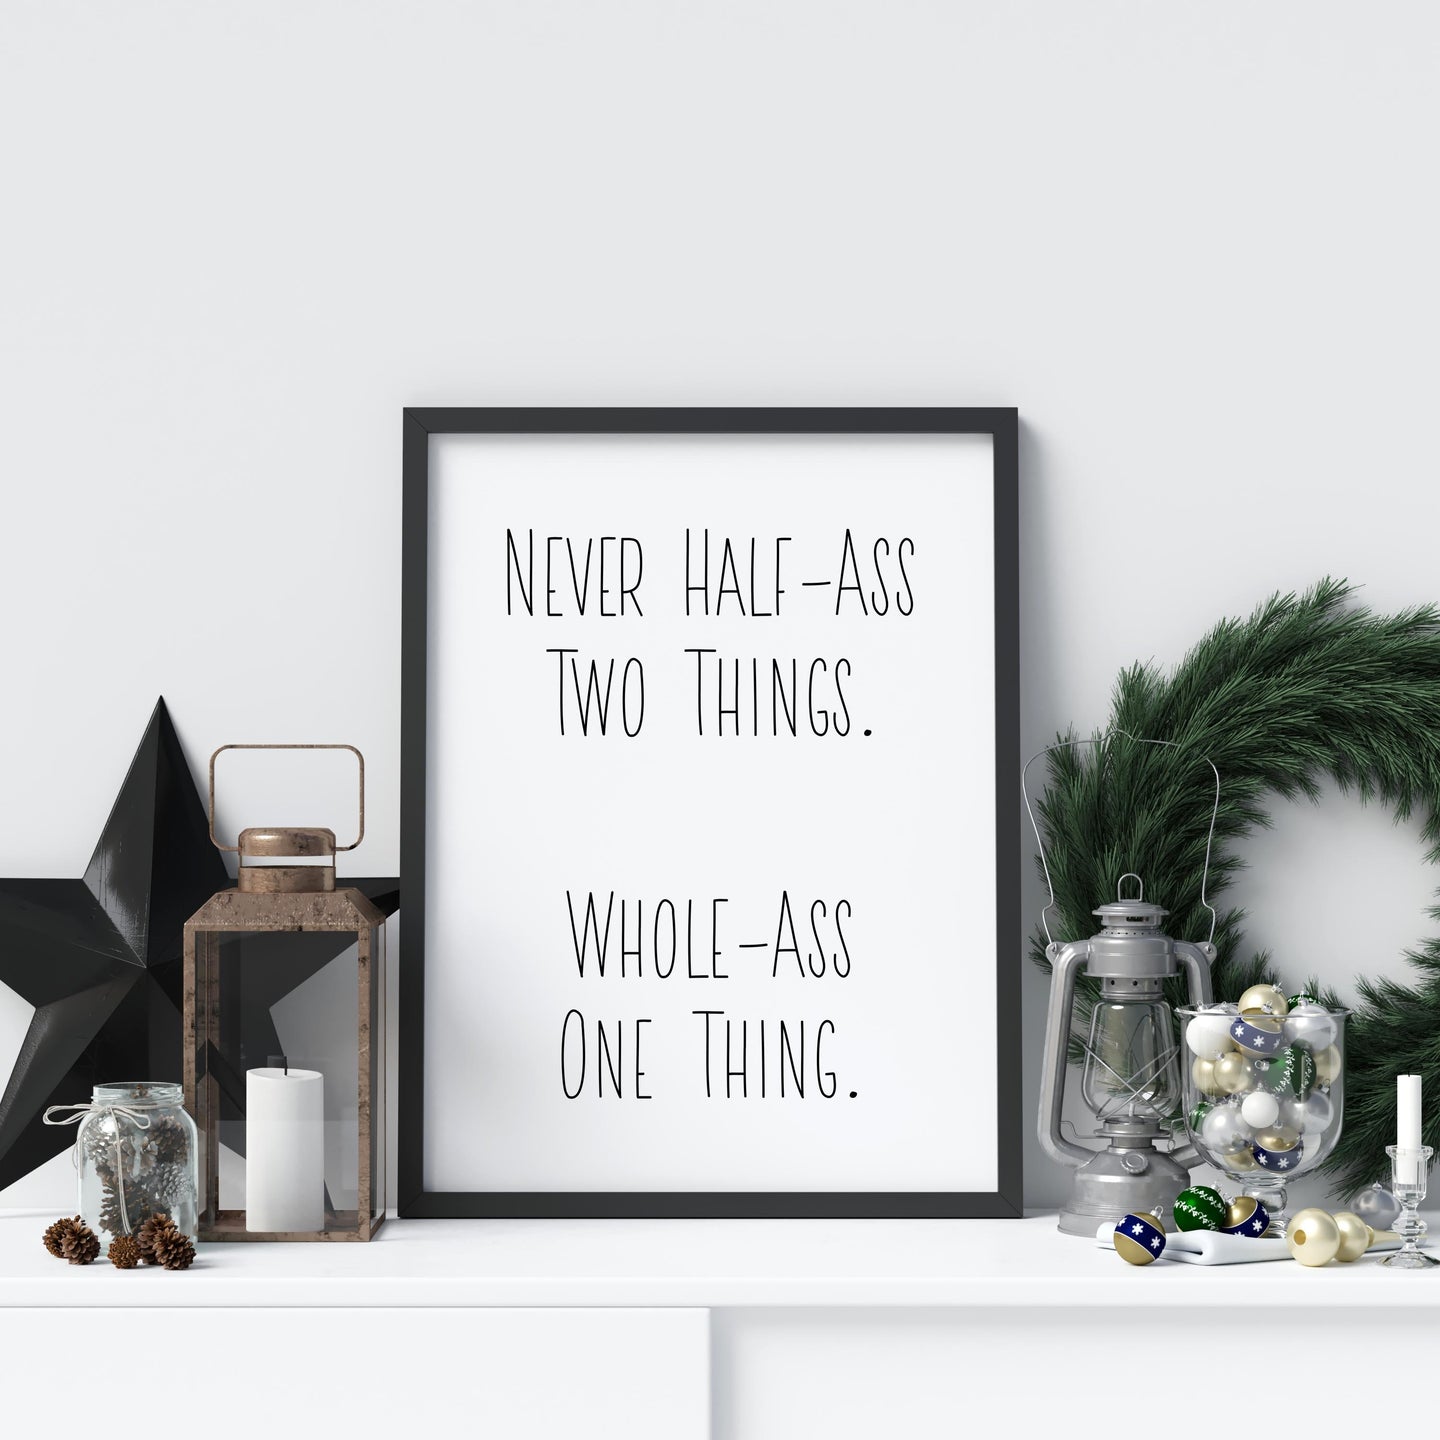 Ron Swanson quote - Parks and recreation Poster - Never half-ass two things. Whole-ass one thing - Parks and rec print UNFRAMED